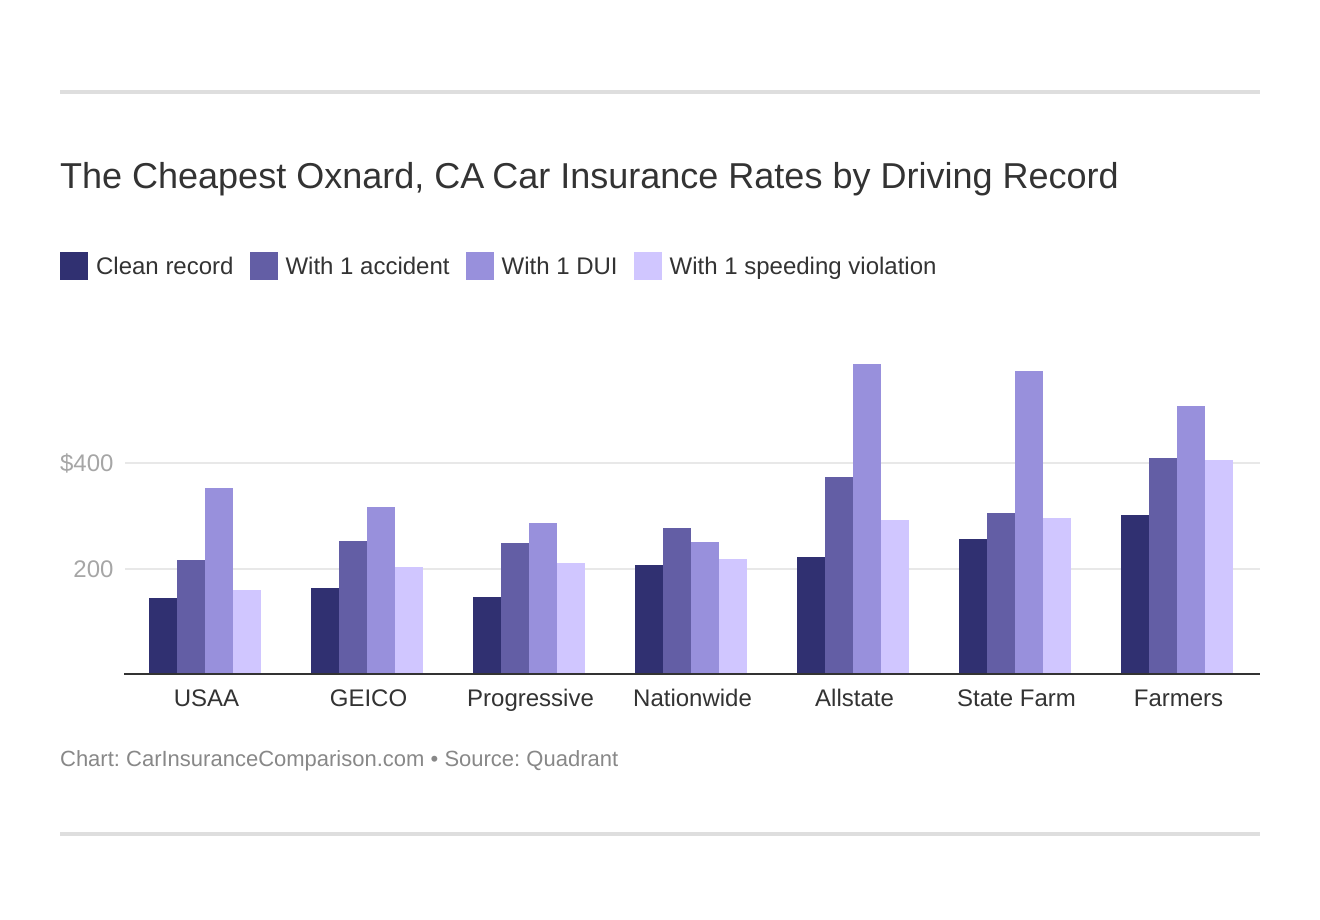 The Cheapest Oxnard, CA Car Insurance Rates by Driving Record